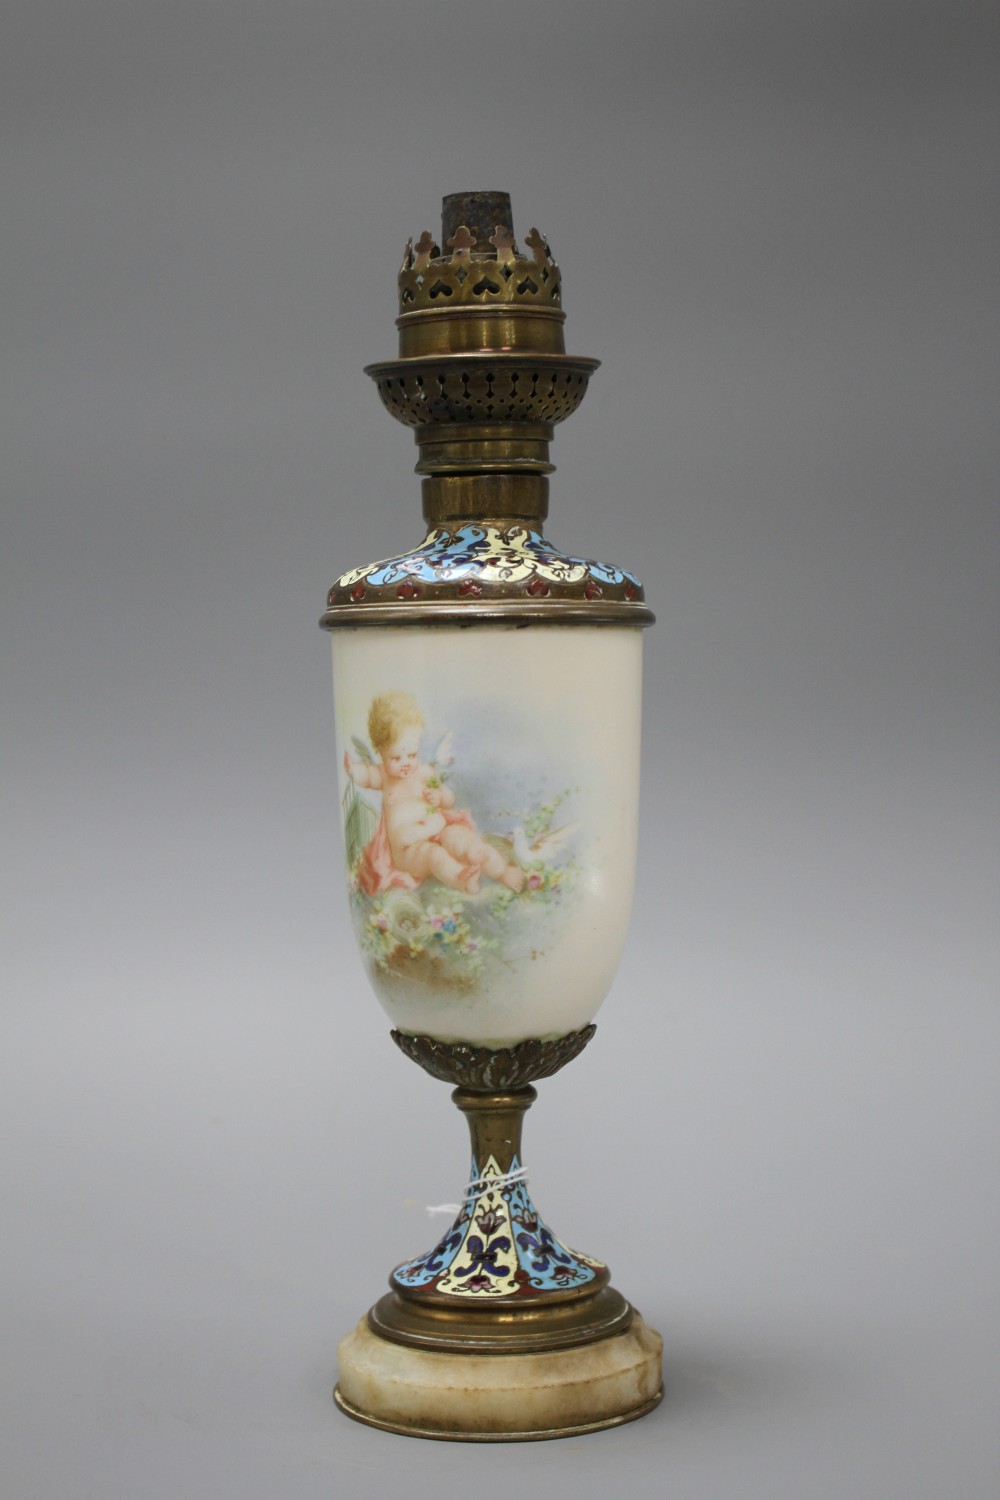 An early 20th century French champleve enamel bronze and ceramic lamp base, painted with a cherub, height 28cm